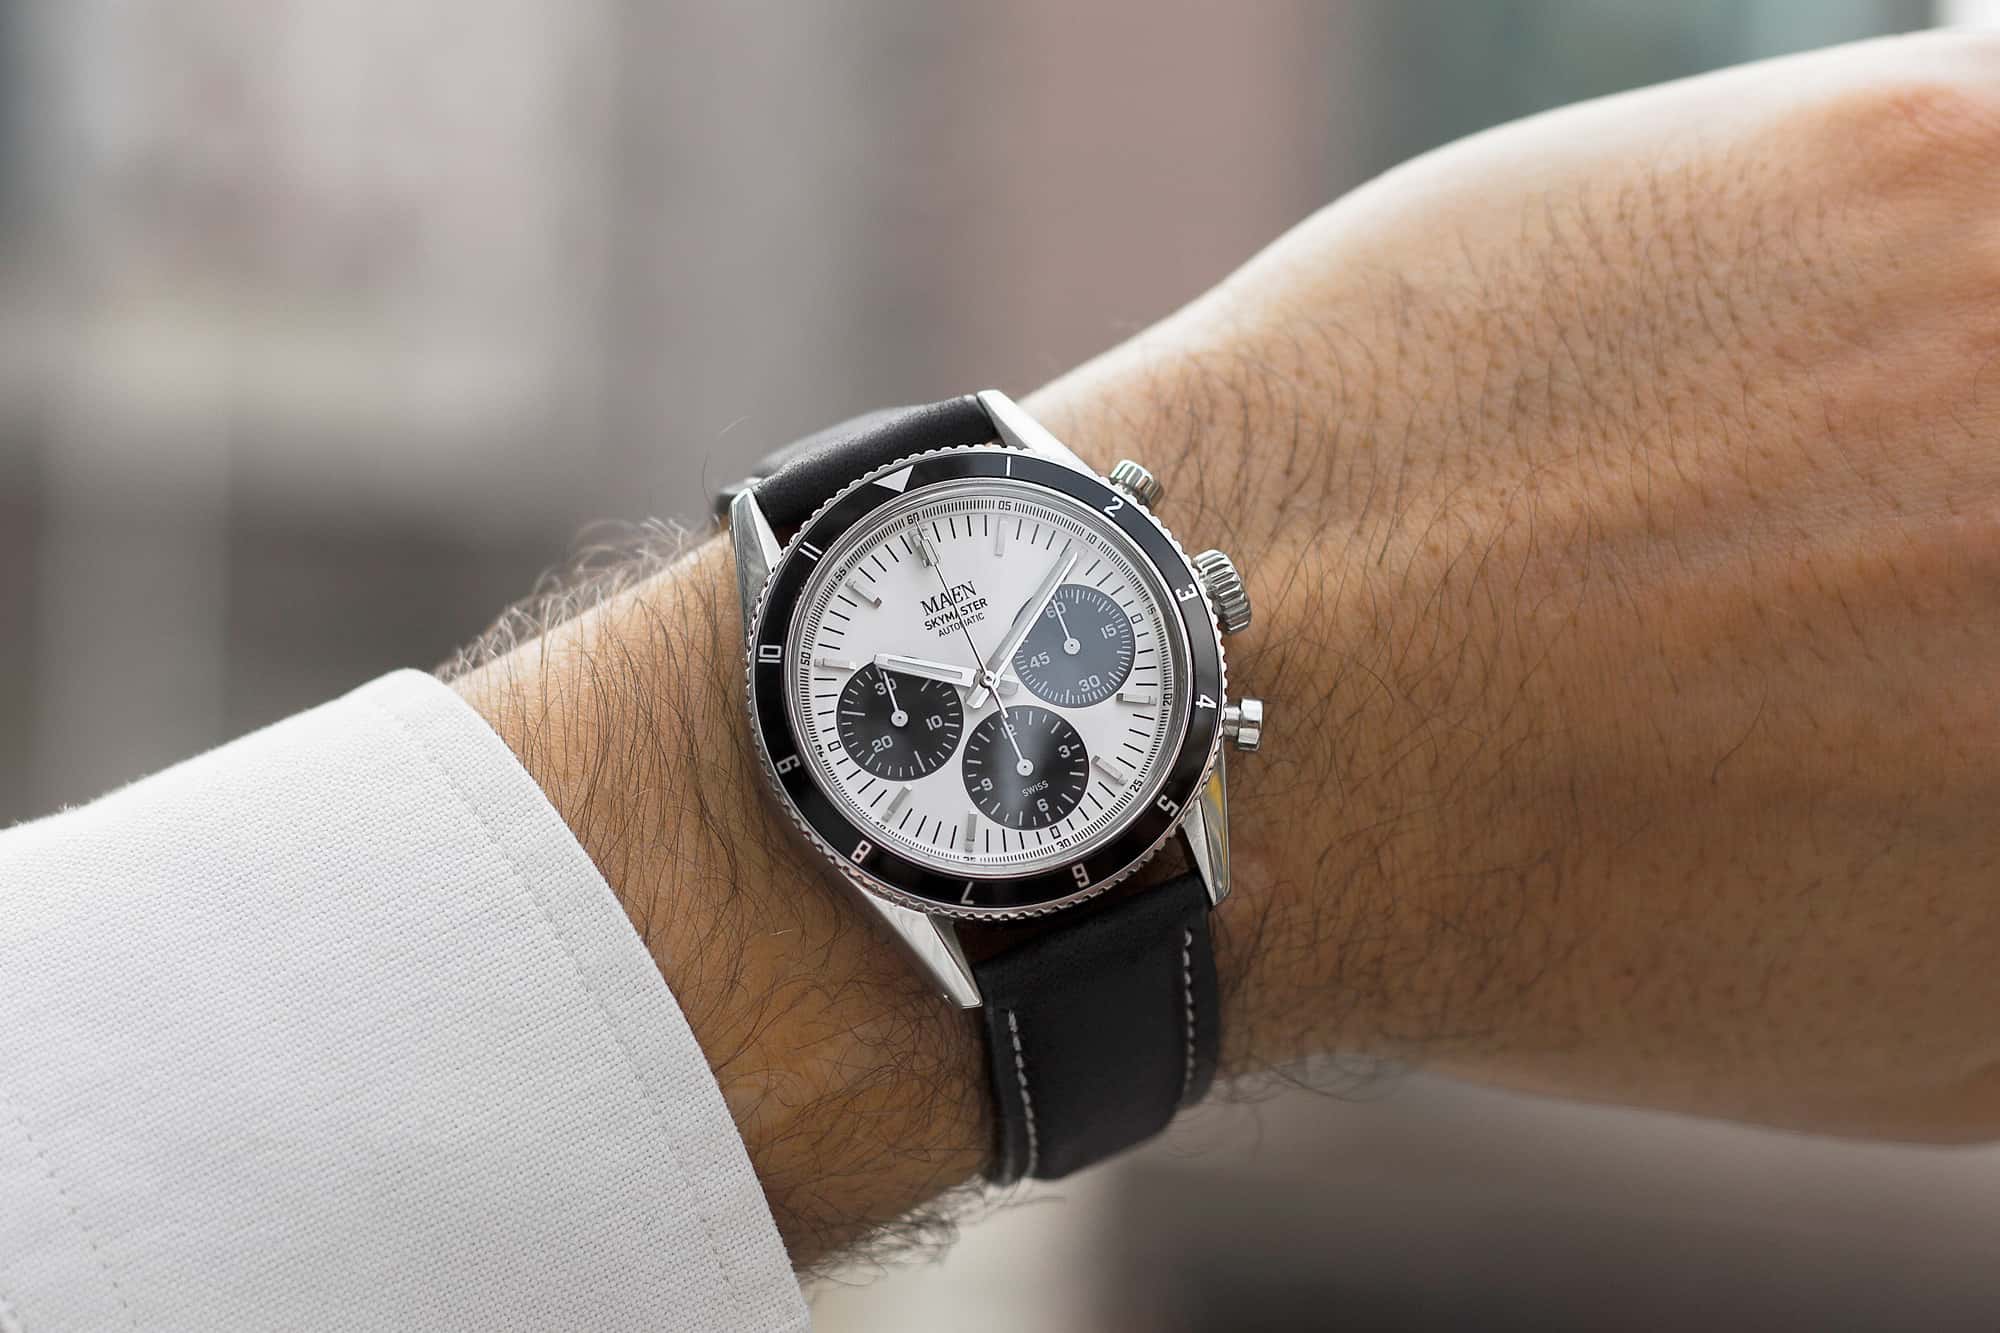 Introducing the MAEN Skymaster 38, a Value-Packed, Vintage-Inspired Automatic Chronograph